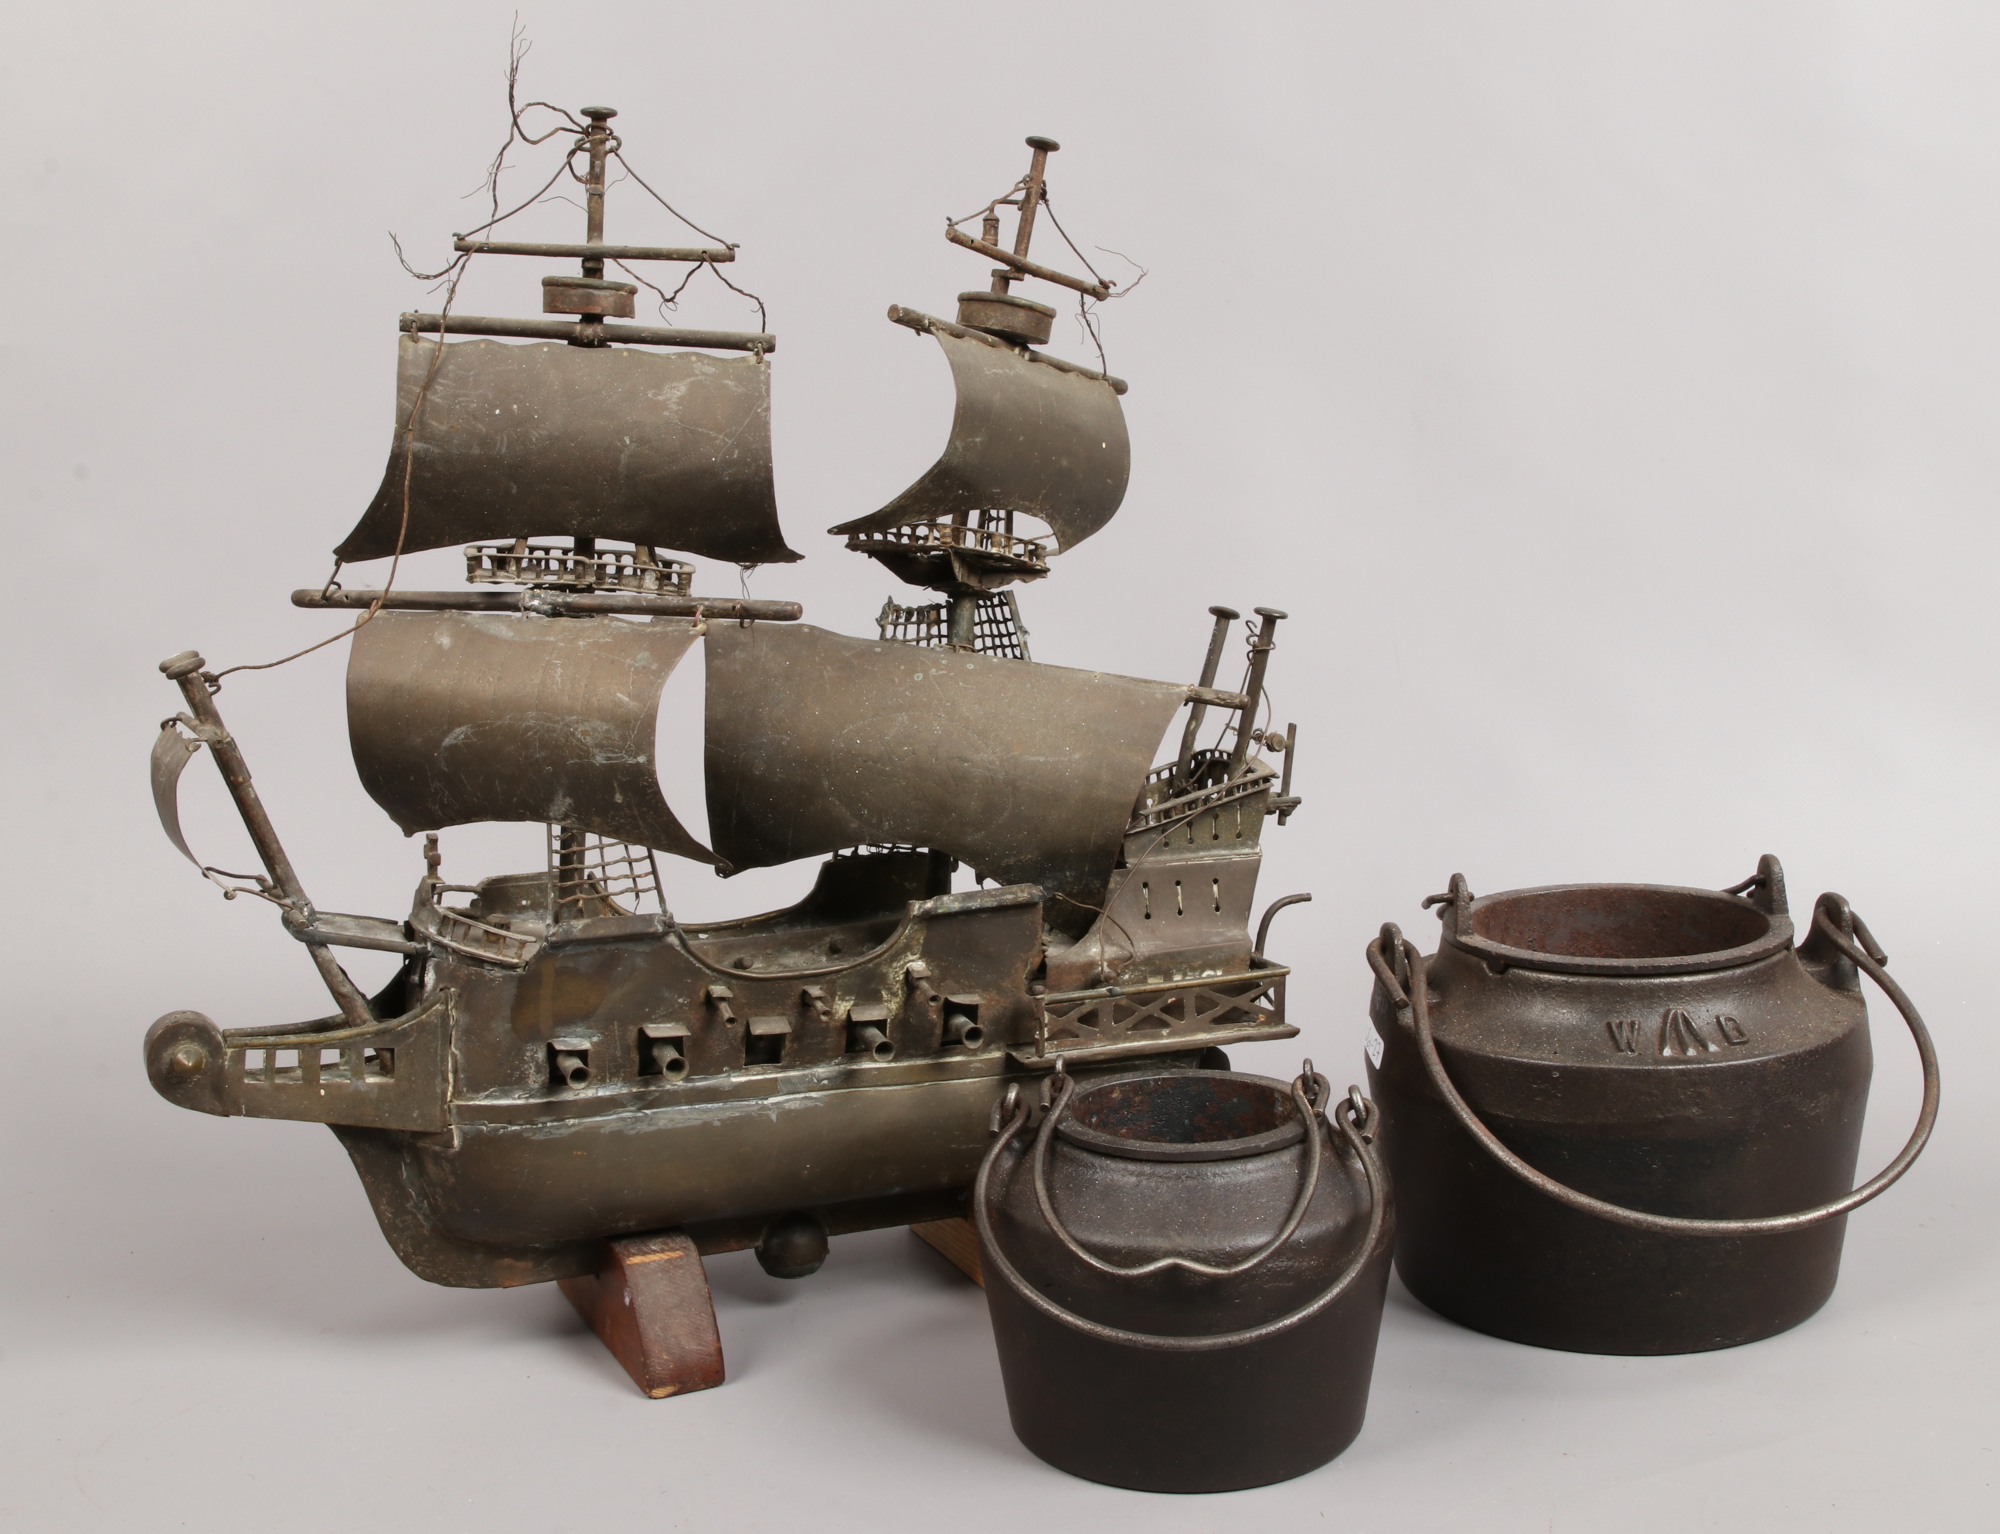 Two Victorian cast iron glue pots, one with broad arrow mark along with a brass model of a galleon.